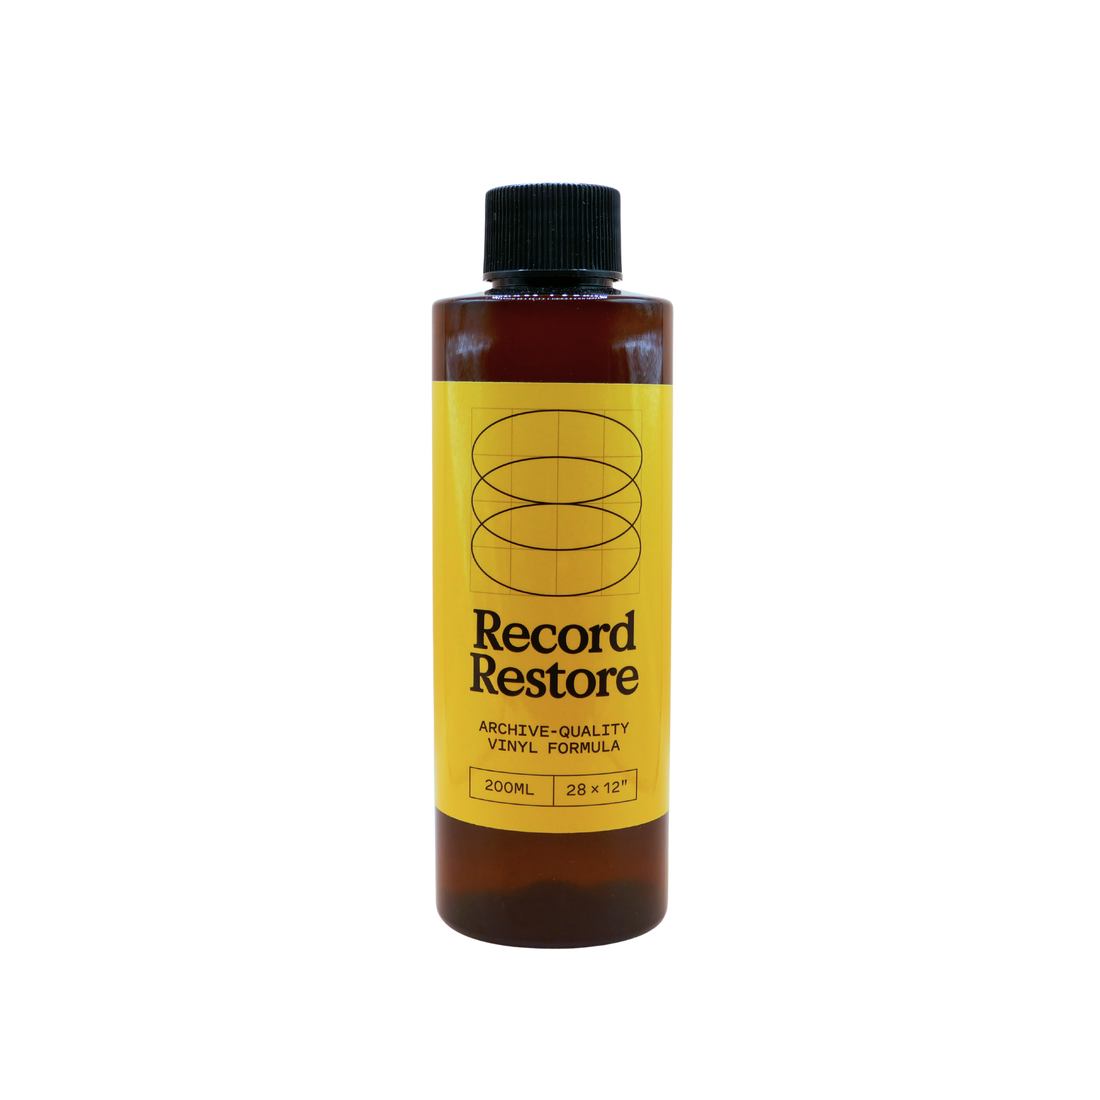 Record Restore Vinyl Record Cleaning Fluid Solution single bottle